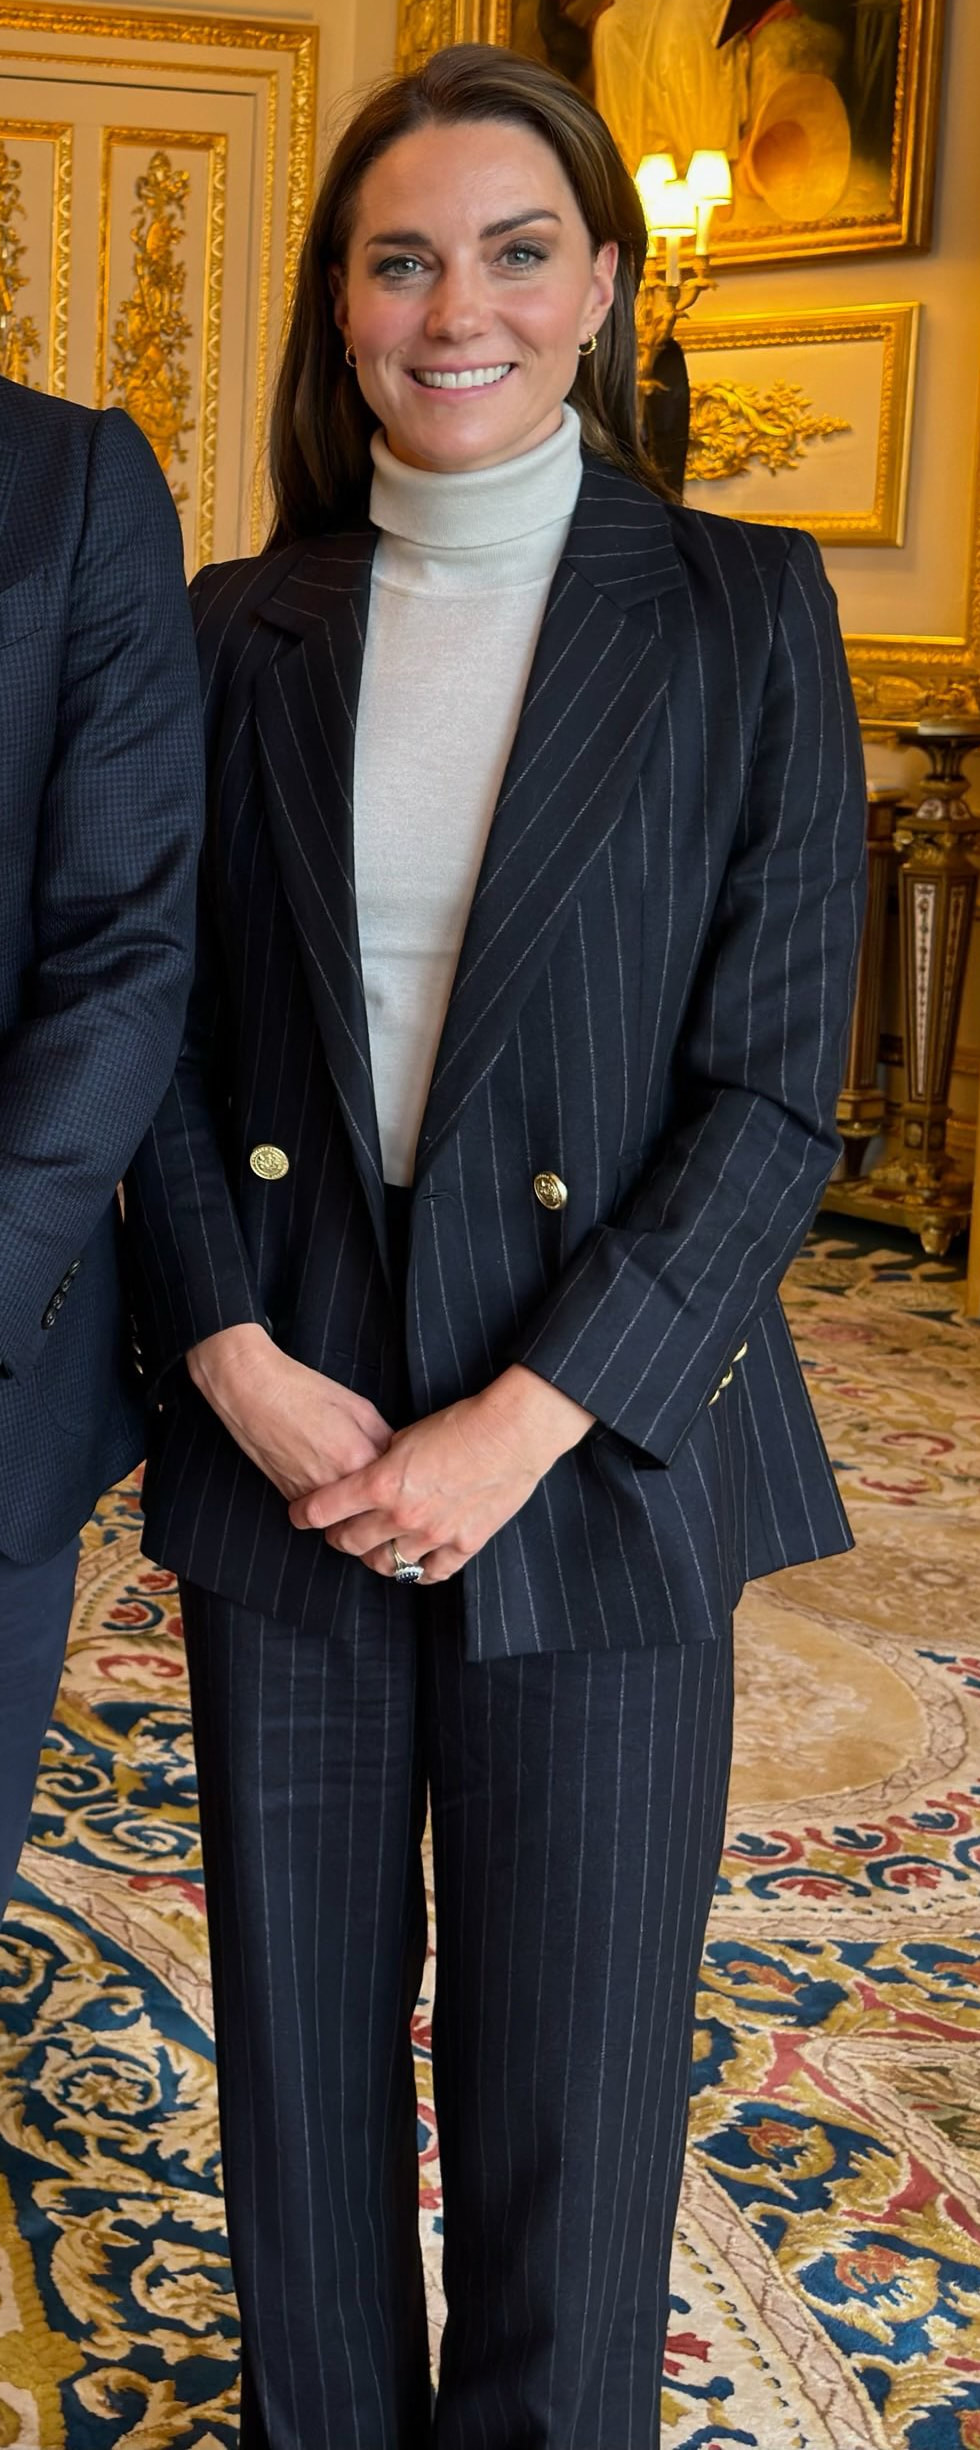 Holland Cooper Double-Breasted Blazer in Navy Chalk Pin Stripe as seen on Kate Middleton, Princess of Wales.